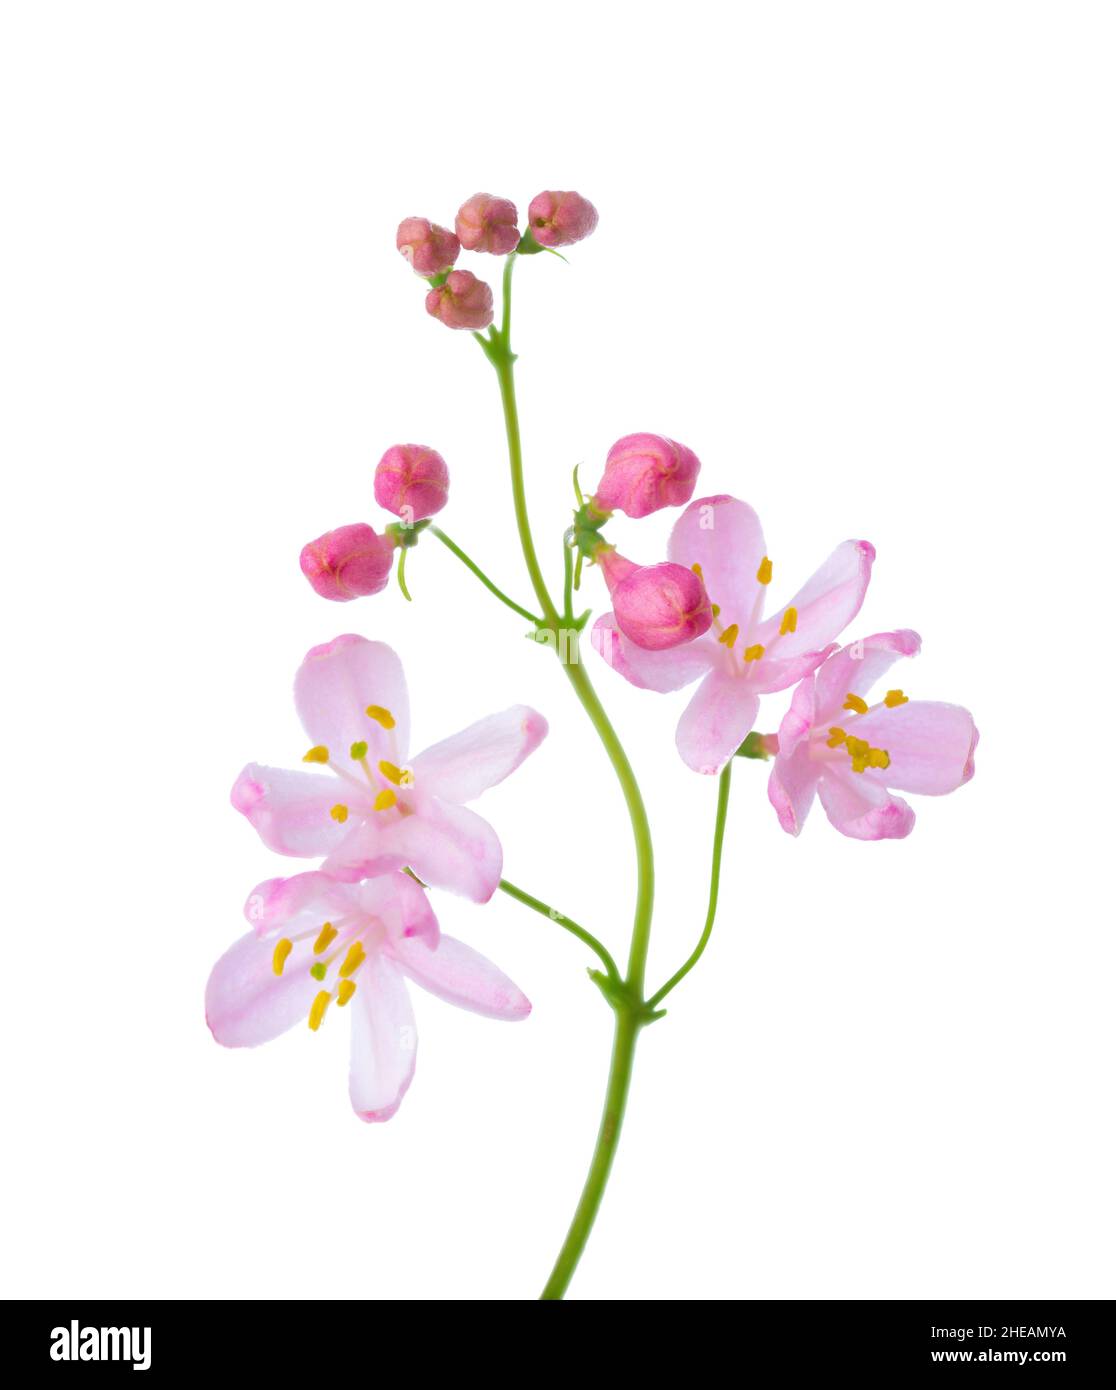 Small light pink  flowers of  Honeysuckle (Tatarian Honeysuckle) isolated on white background. Selective focus. Stock Photo